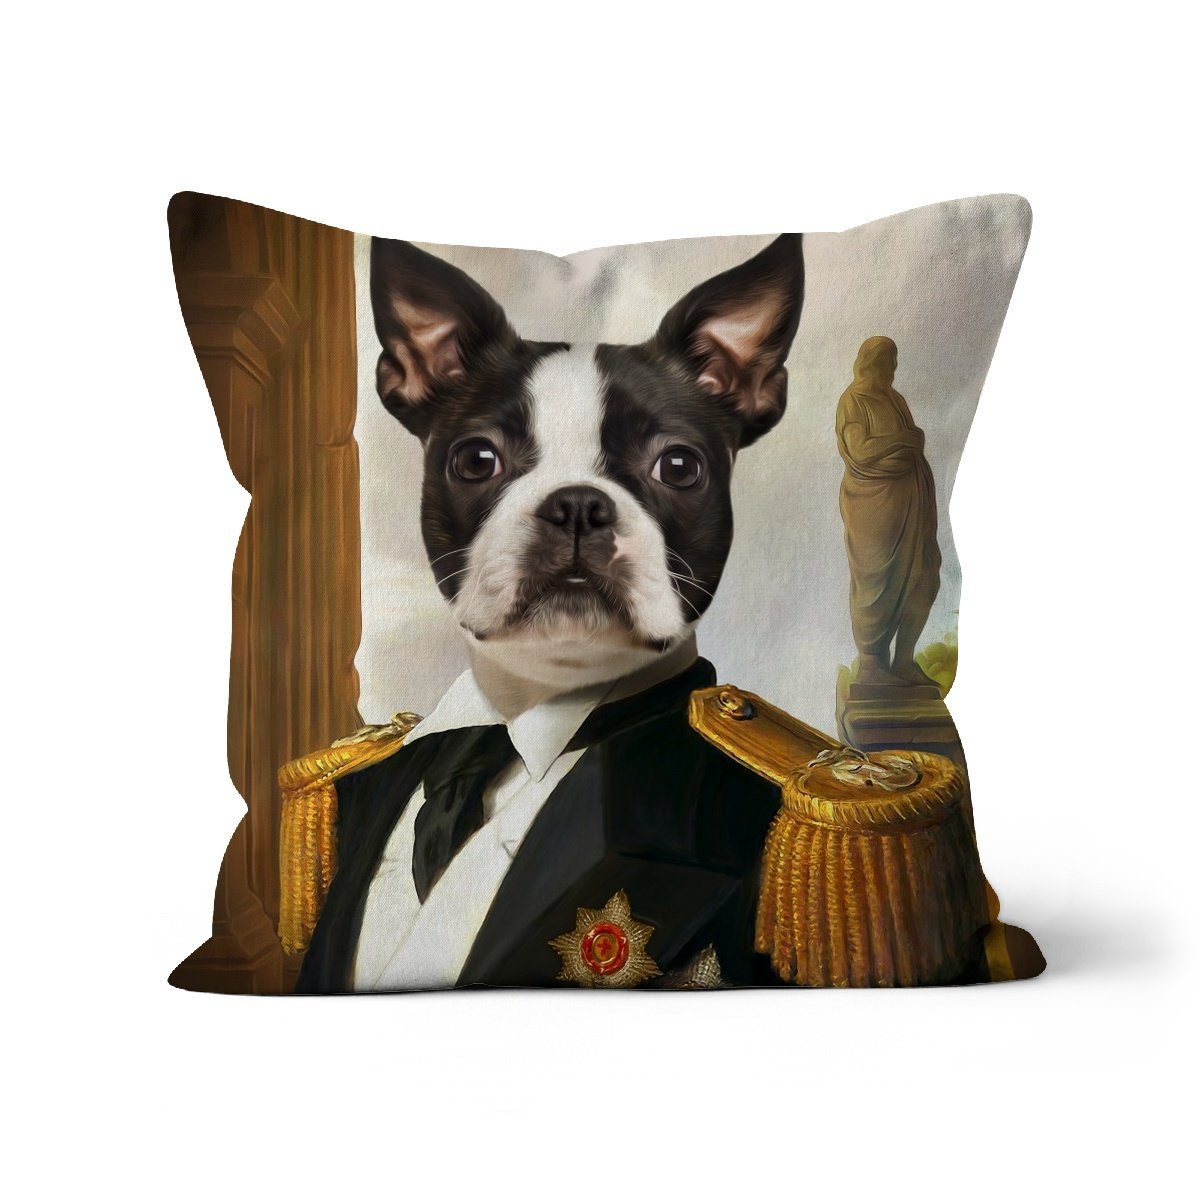 The Sargent: Custom Pet Throw Pillow - Paw & Glory - #pet portraits# - #dog portraits# - #pet portraits uk#paw & glory, pet portraits pillow,personalised cat pillow, dog shaped pillows, custom pillow cover, pillows with dogs picture, my pet pillow